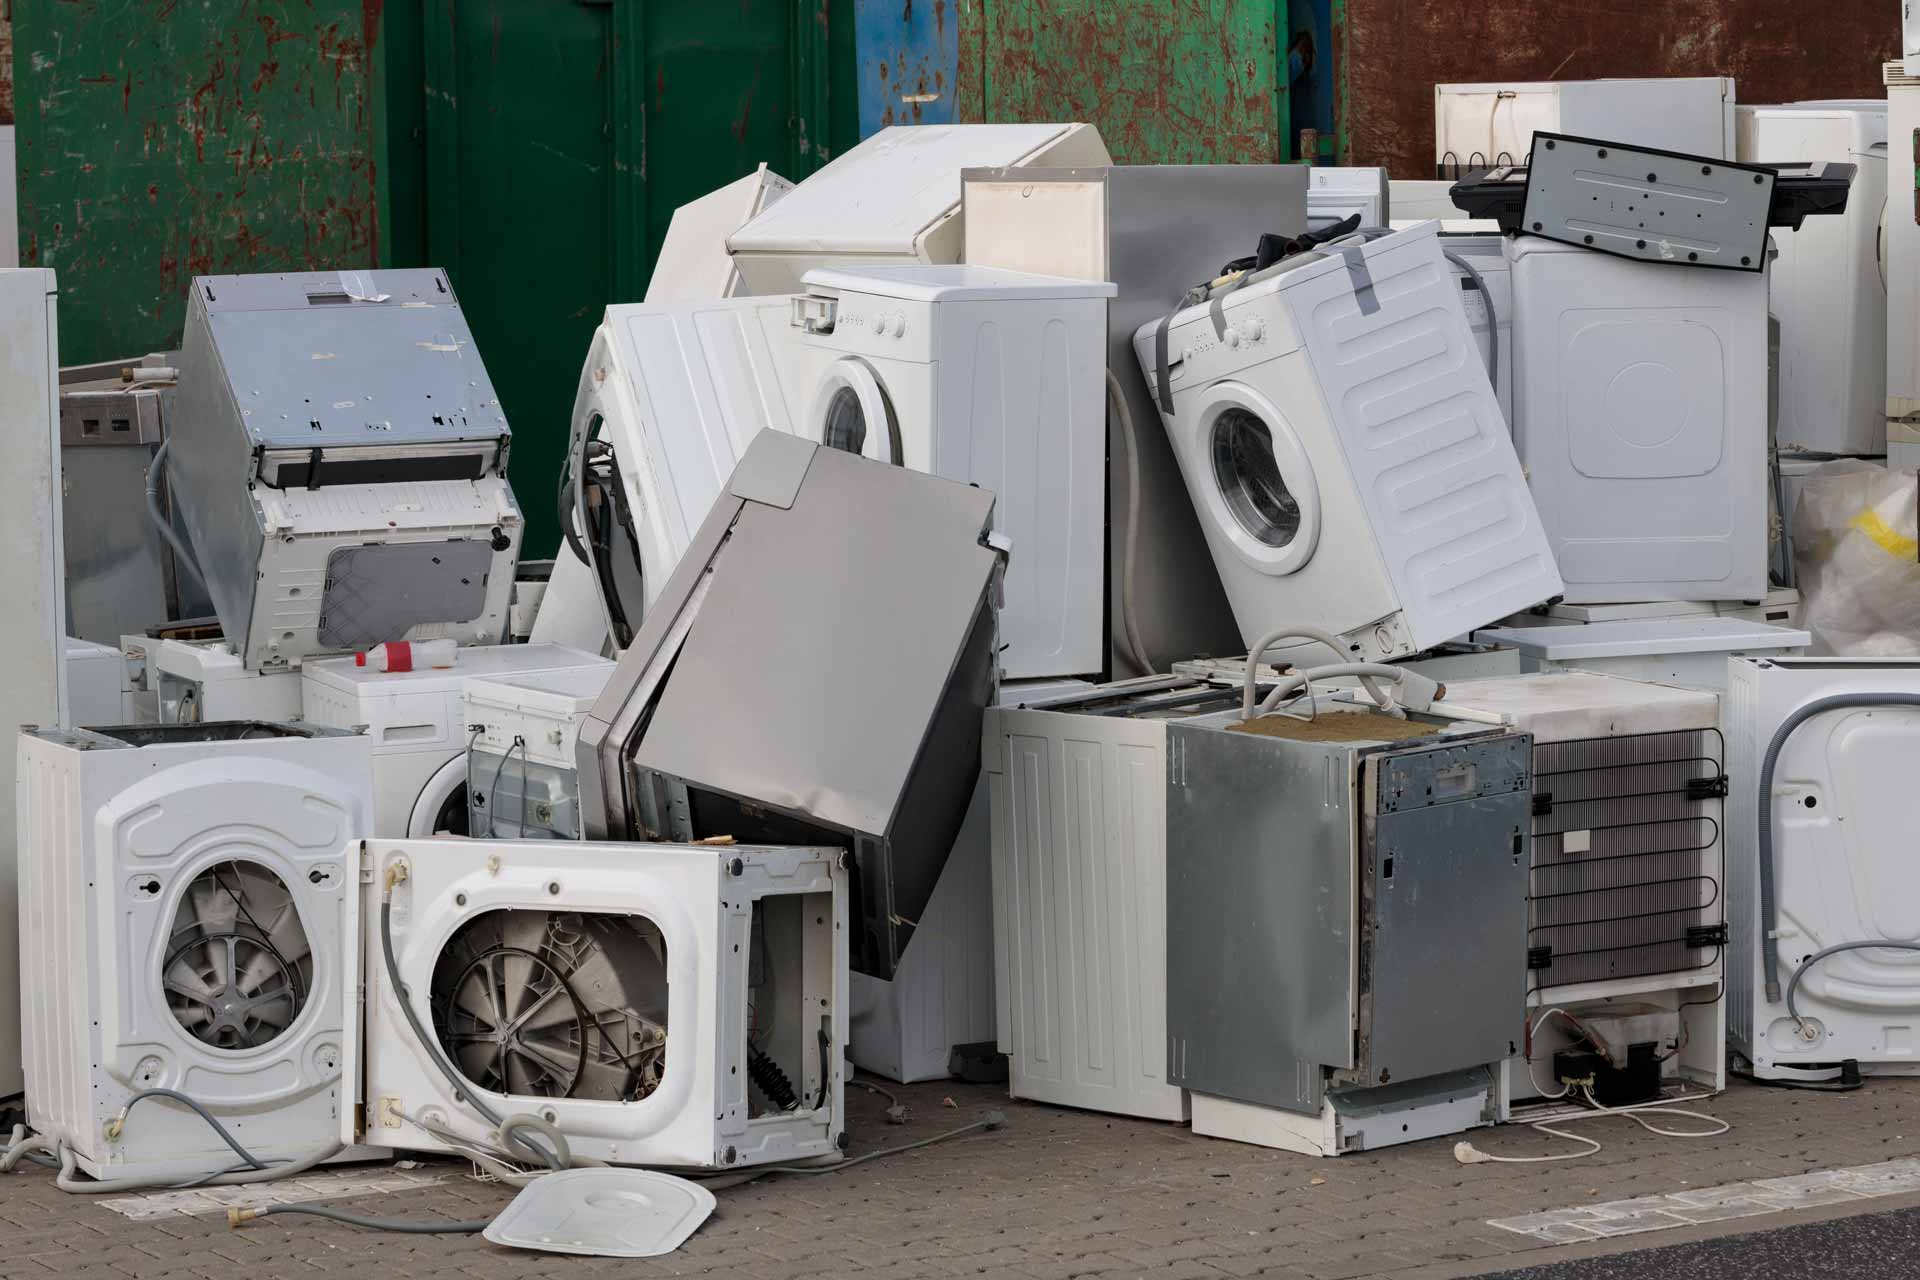 Pile of old appliances in a garbage dump